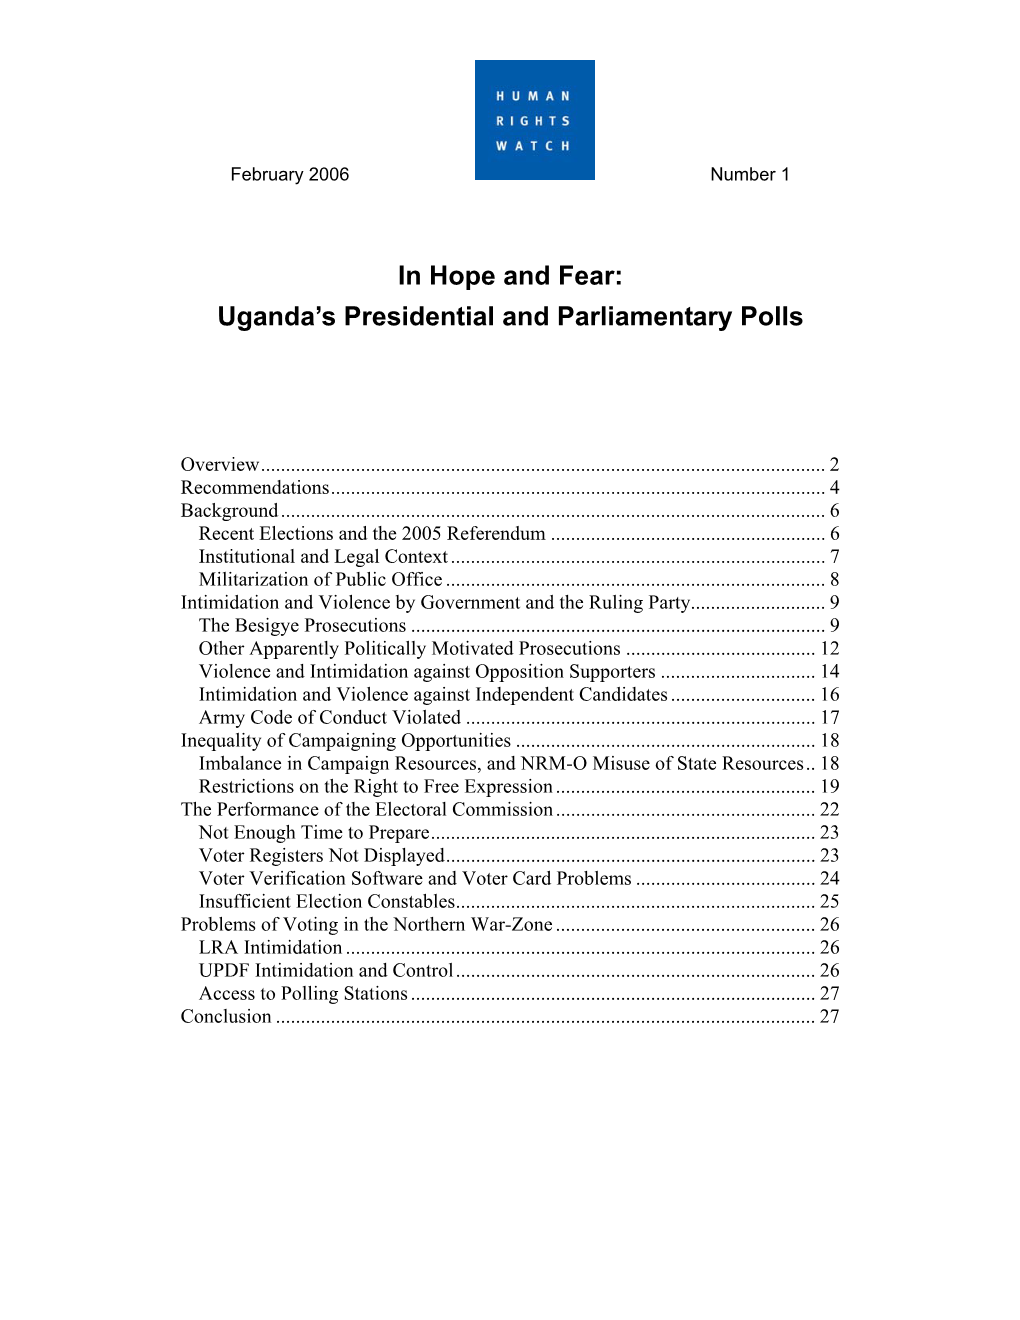 In Hope and Fear: Uganda's Presidential and Parliamentary Polls